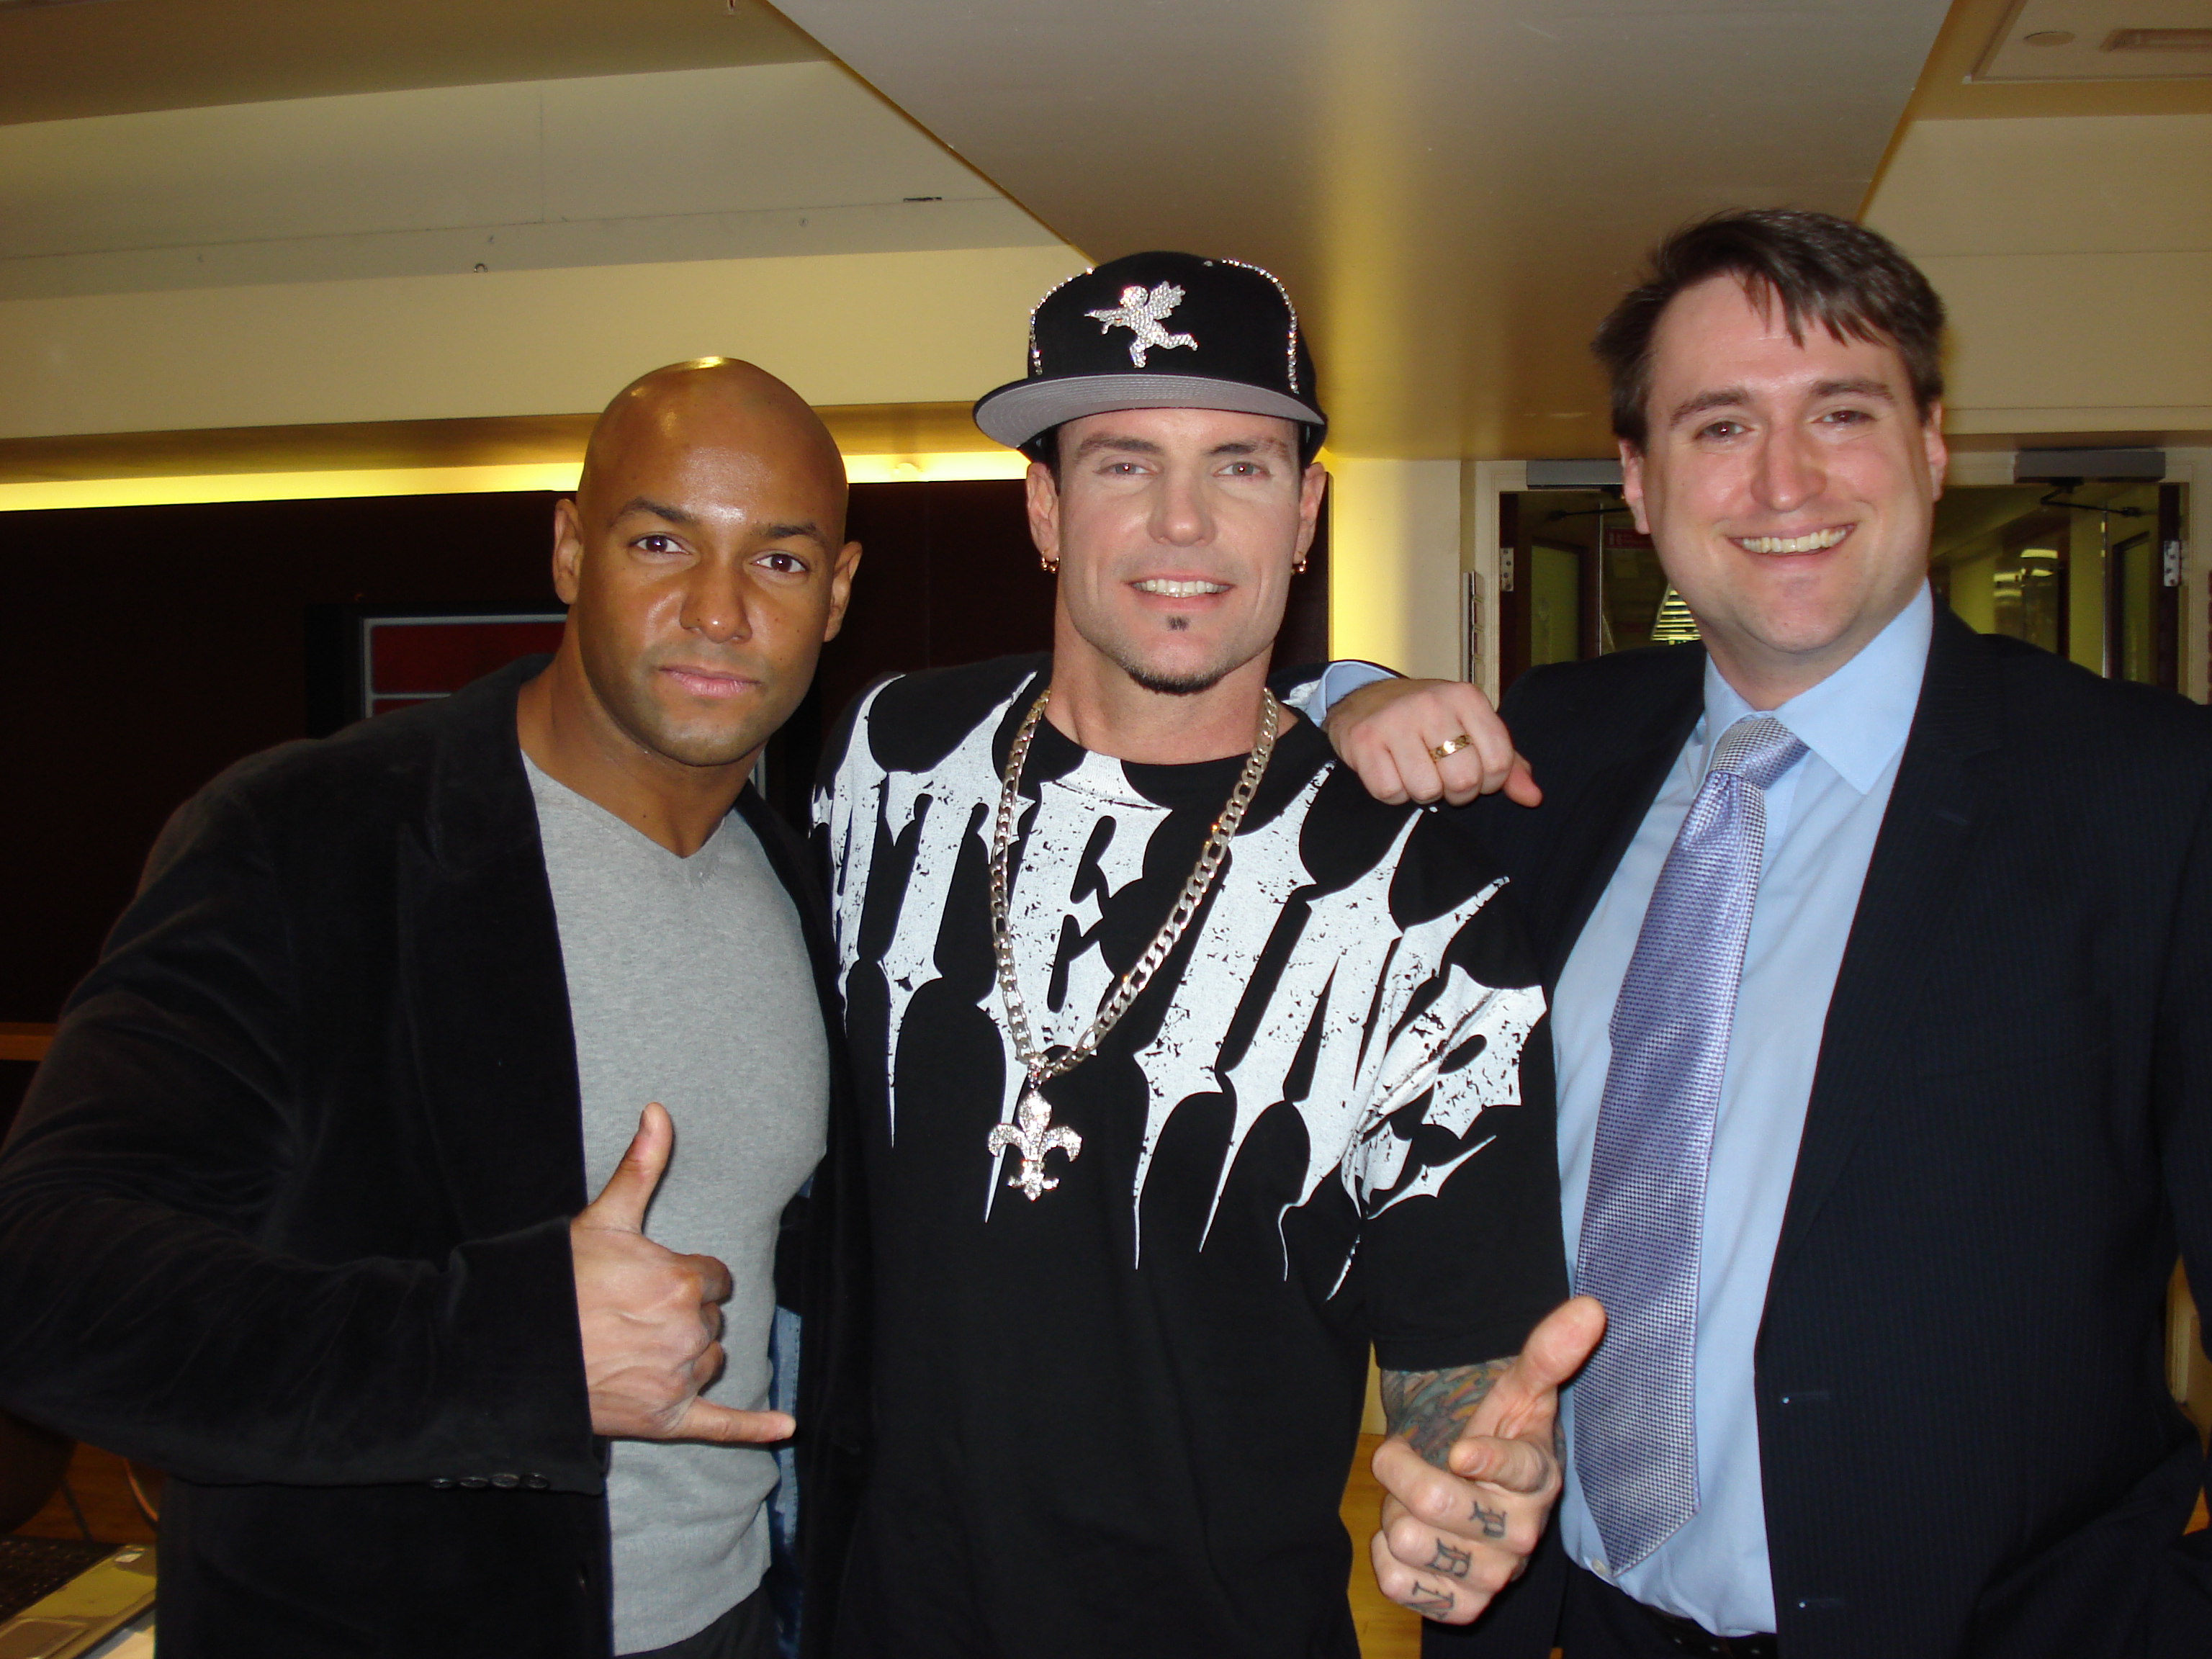 Life Outside Pre Casting meeting at ITV Studios with Producer Martin J. Thomas, Actor/Rapper Vanilla Ice and Casting Director/Co-Producer Andrew Slade